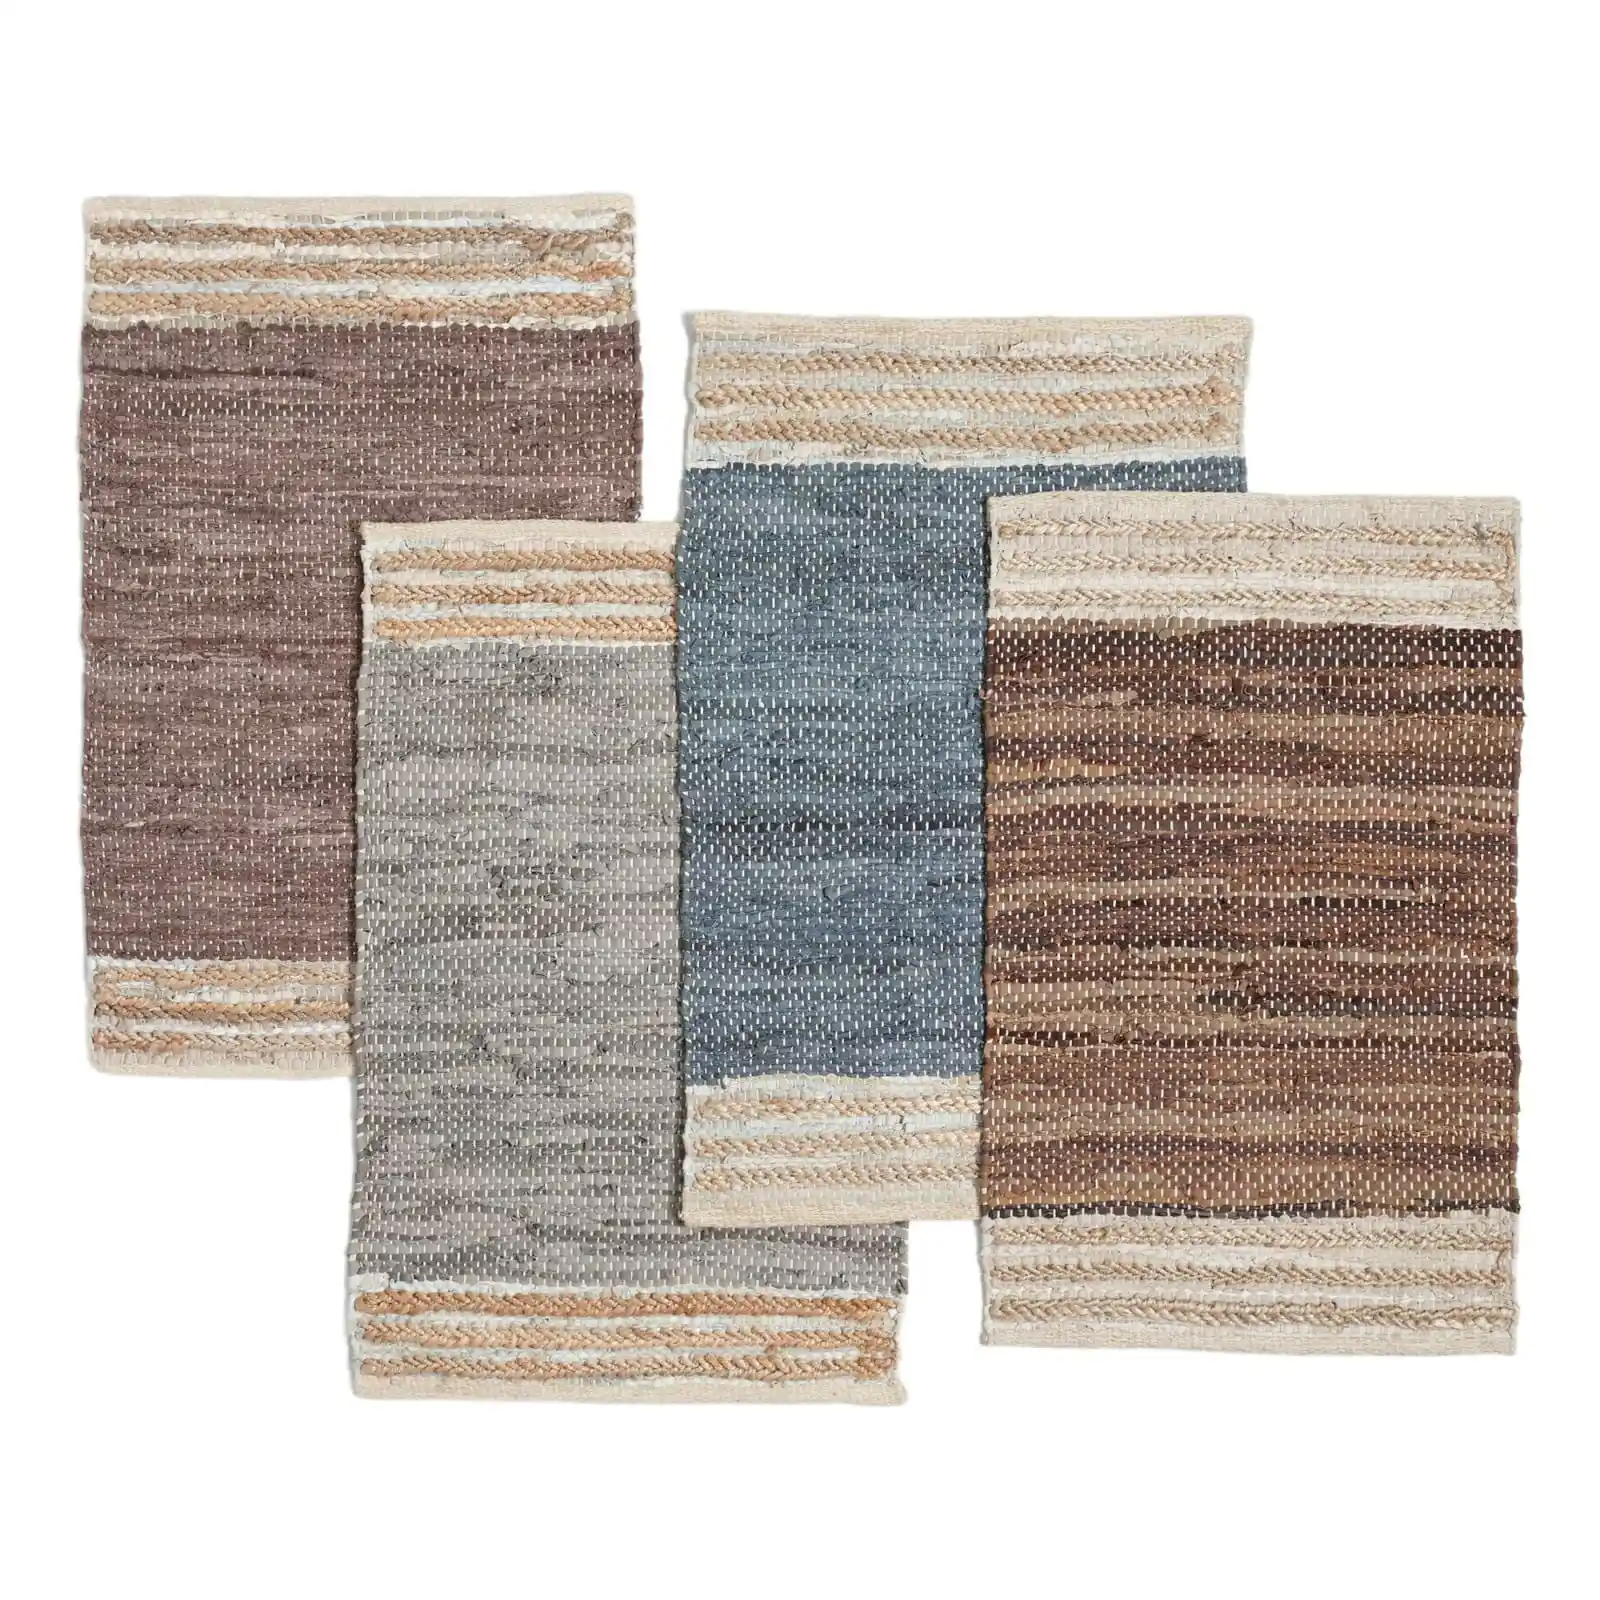 fashion best quality carpets and rugs Recycled Brown Leather Rag Rug Carpets by Impexart for Home